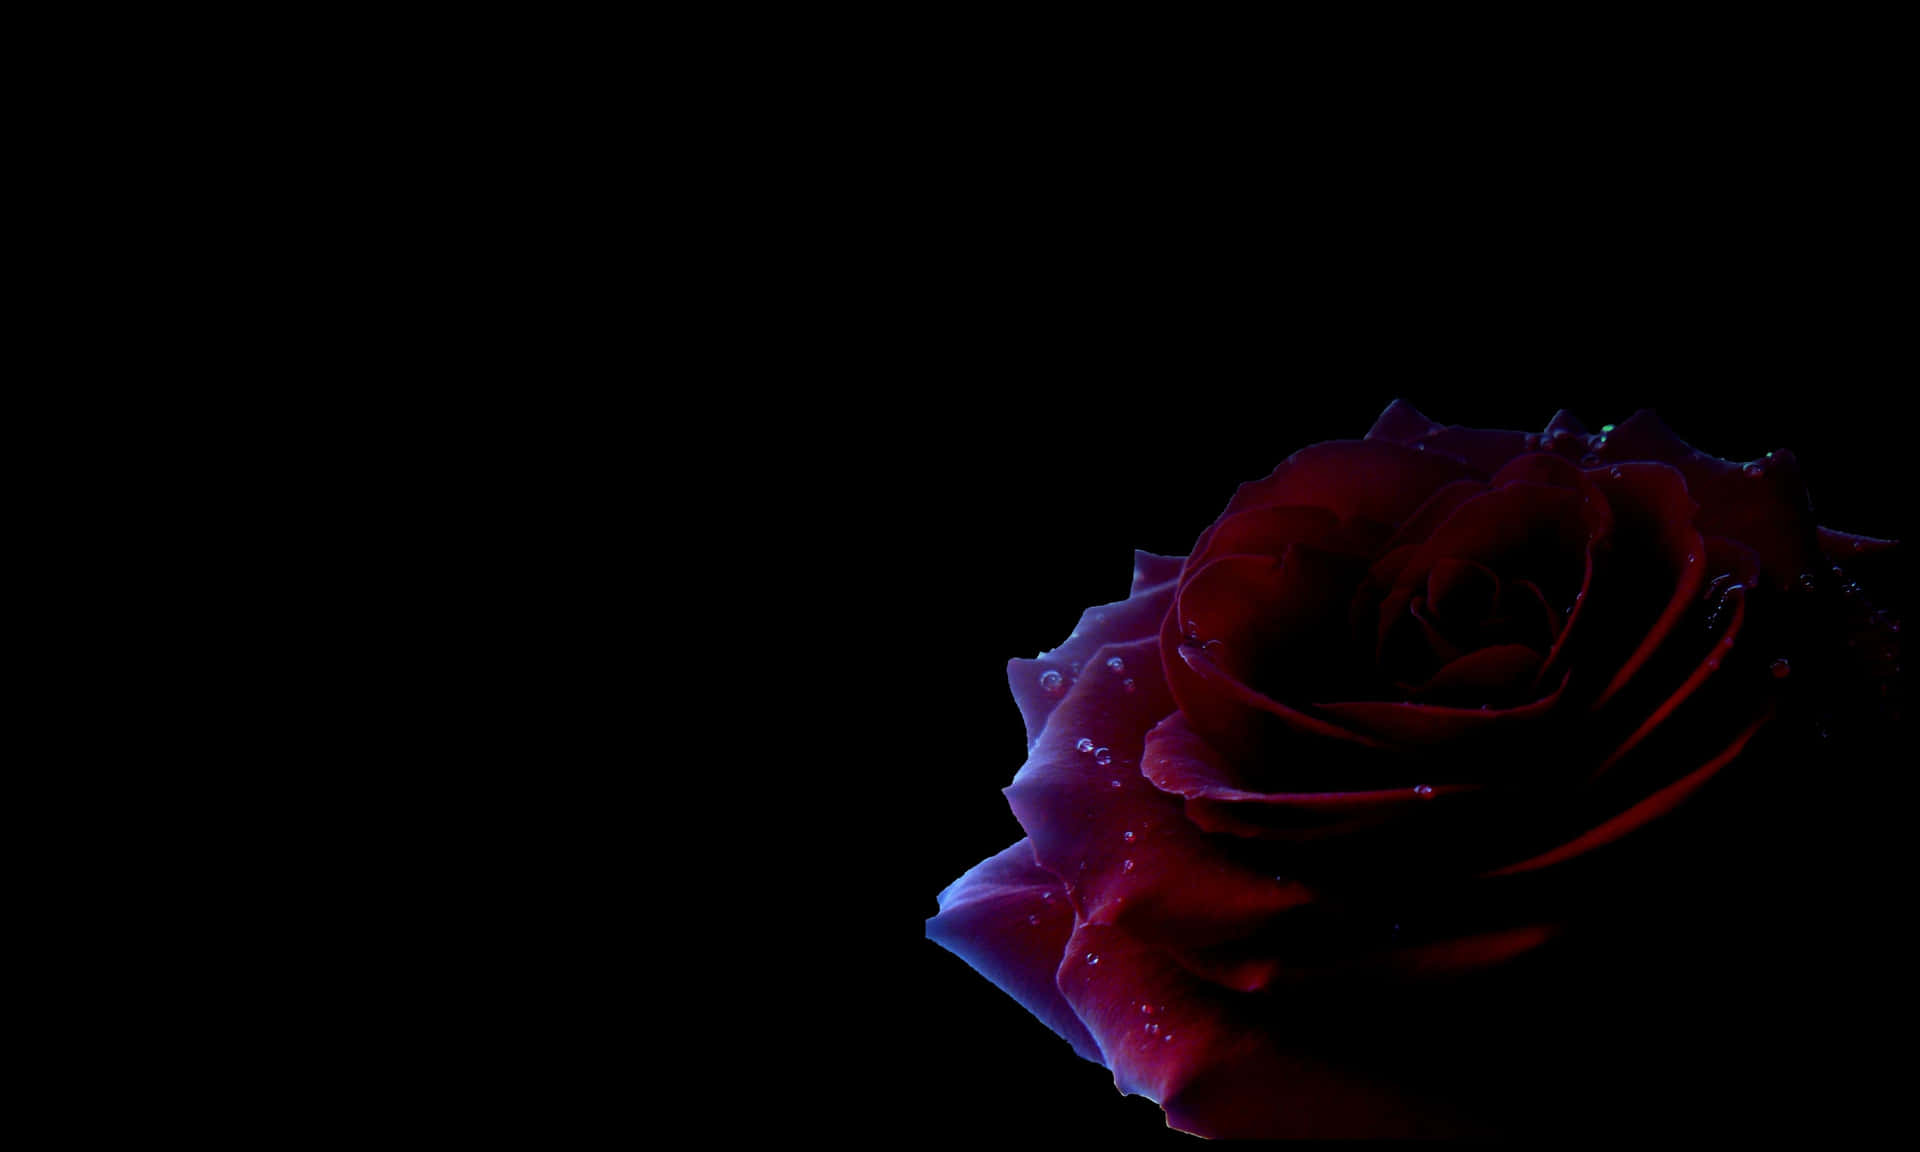 A Striking Black Rose In All Its Dark, Mysterious Beauty